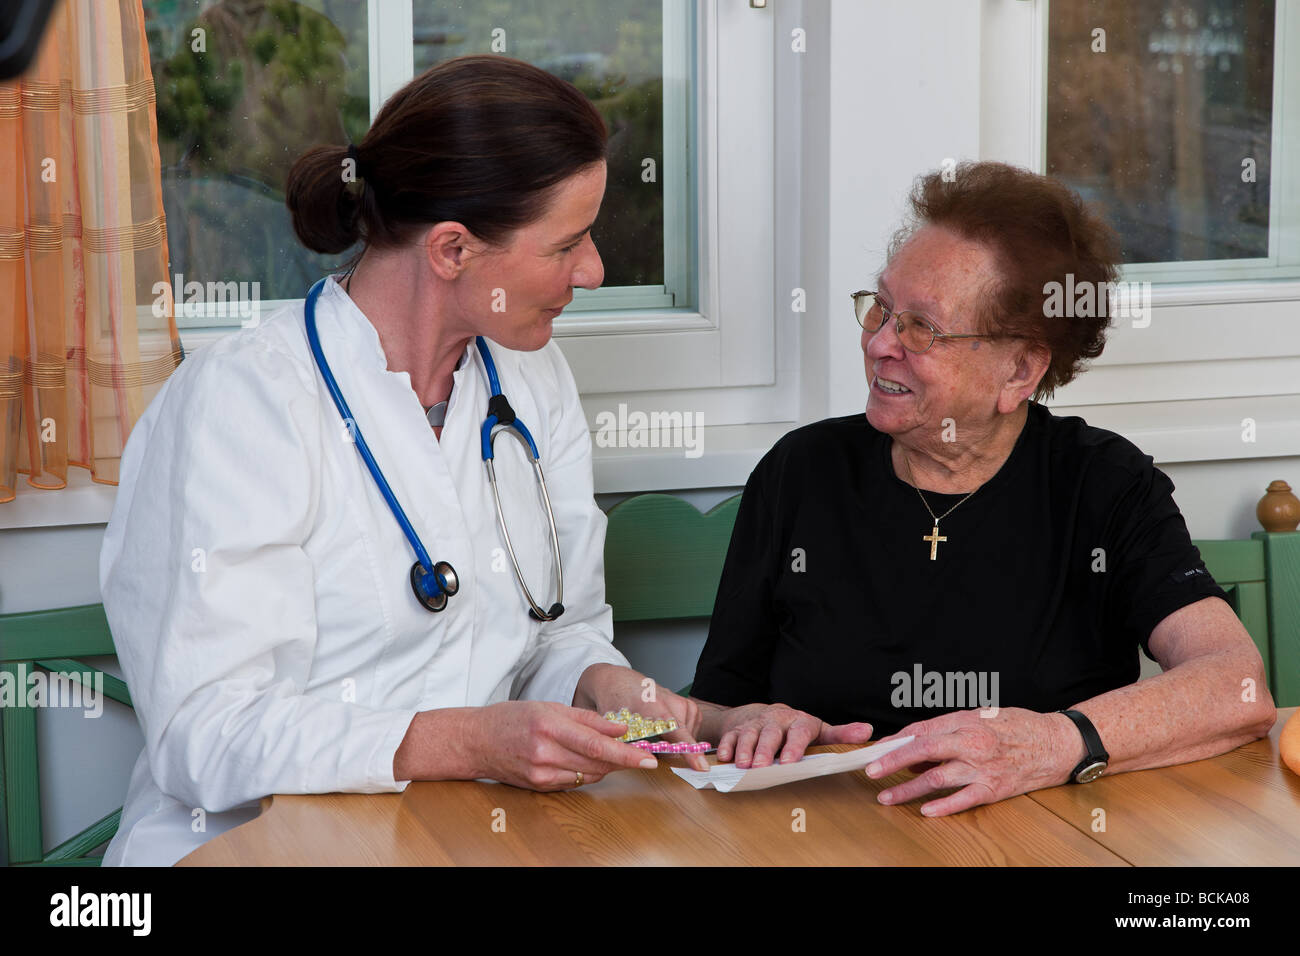 Doctor and patient discussing medication Stock Photo